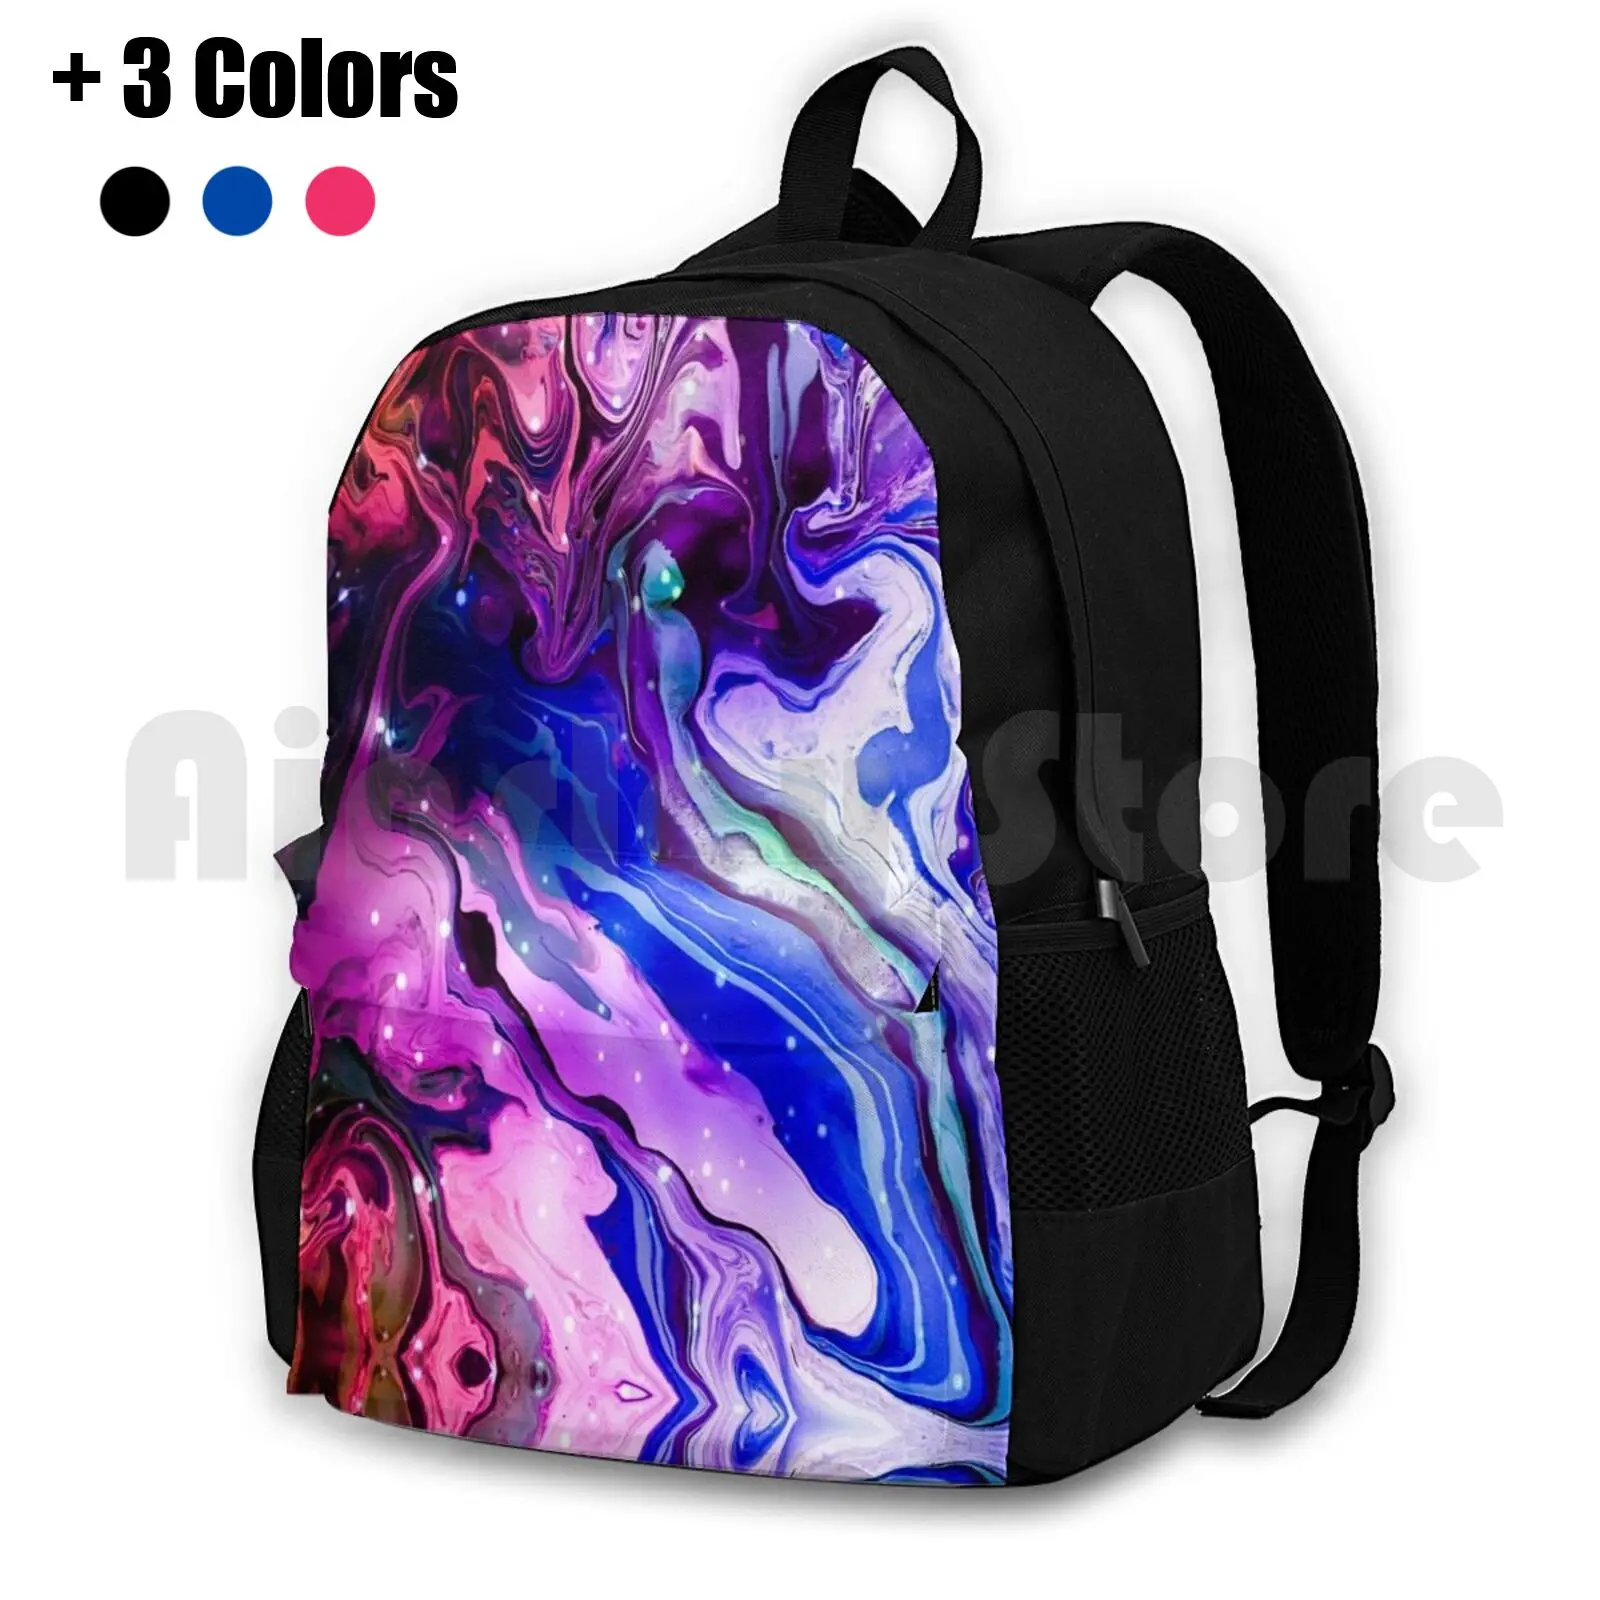 

Cool Blue Outdoor Hiking Backpack Riding Climbing Sports Bag Cosmo Astrology Exotic Colors Abstract Paint Pouring Liquid Stars